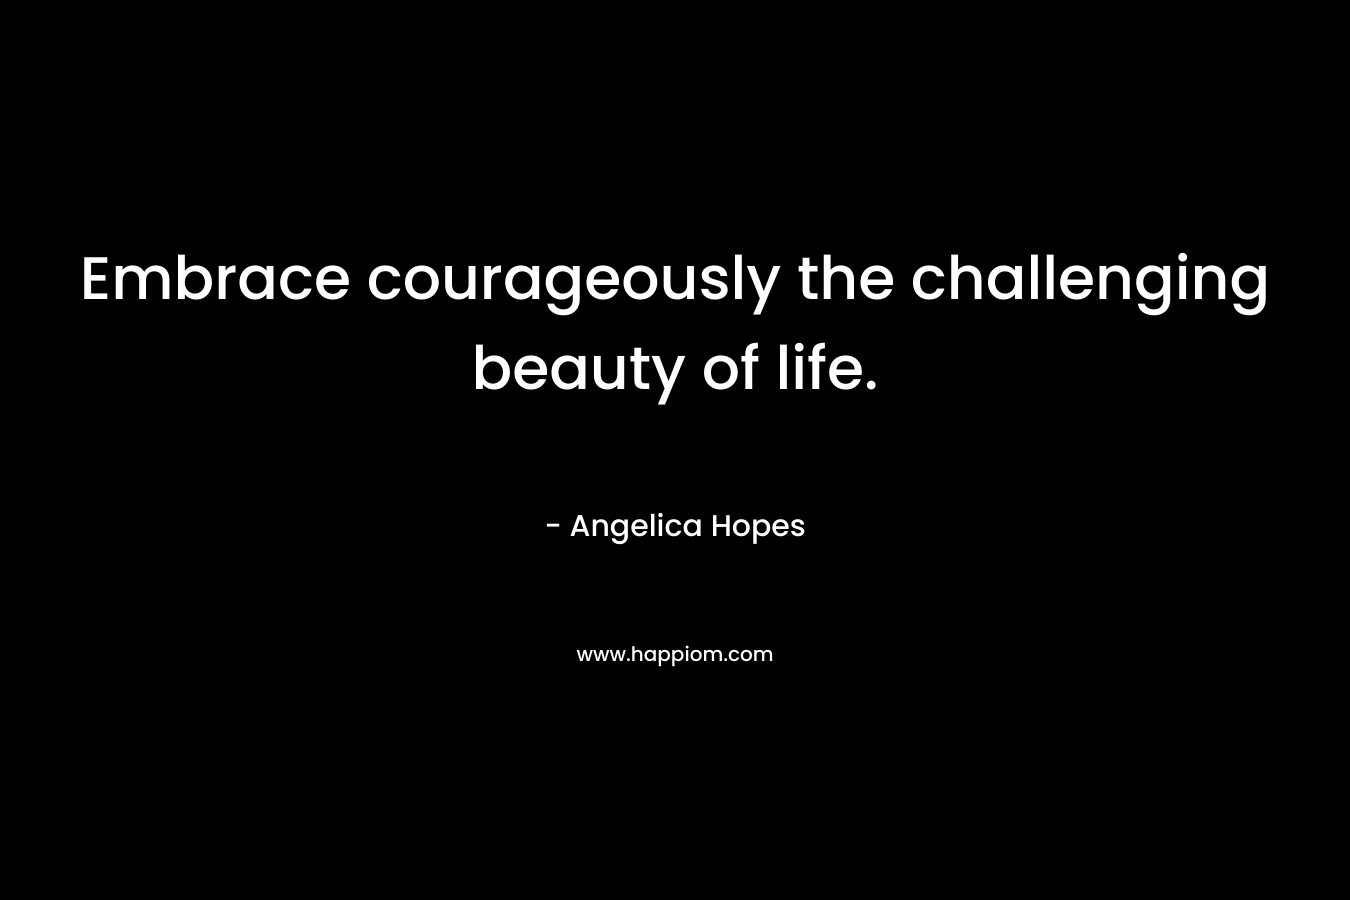 Embrace courageously the challenging beauty of life.